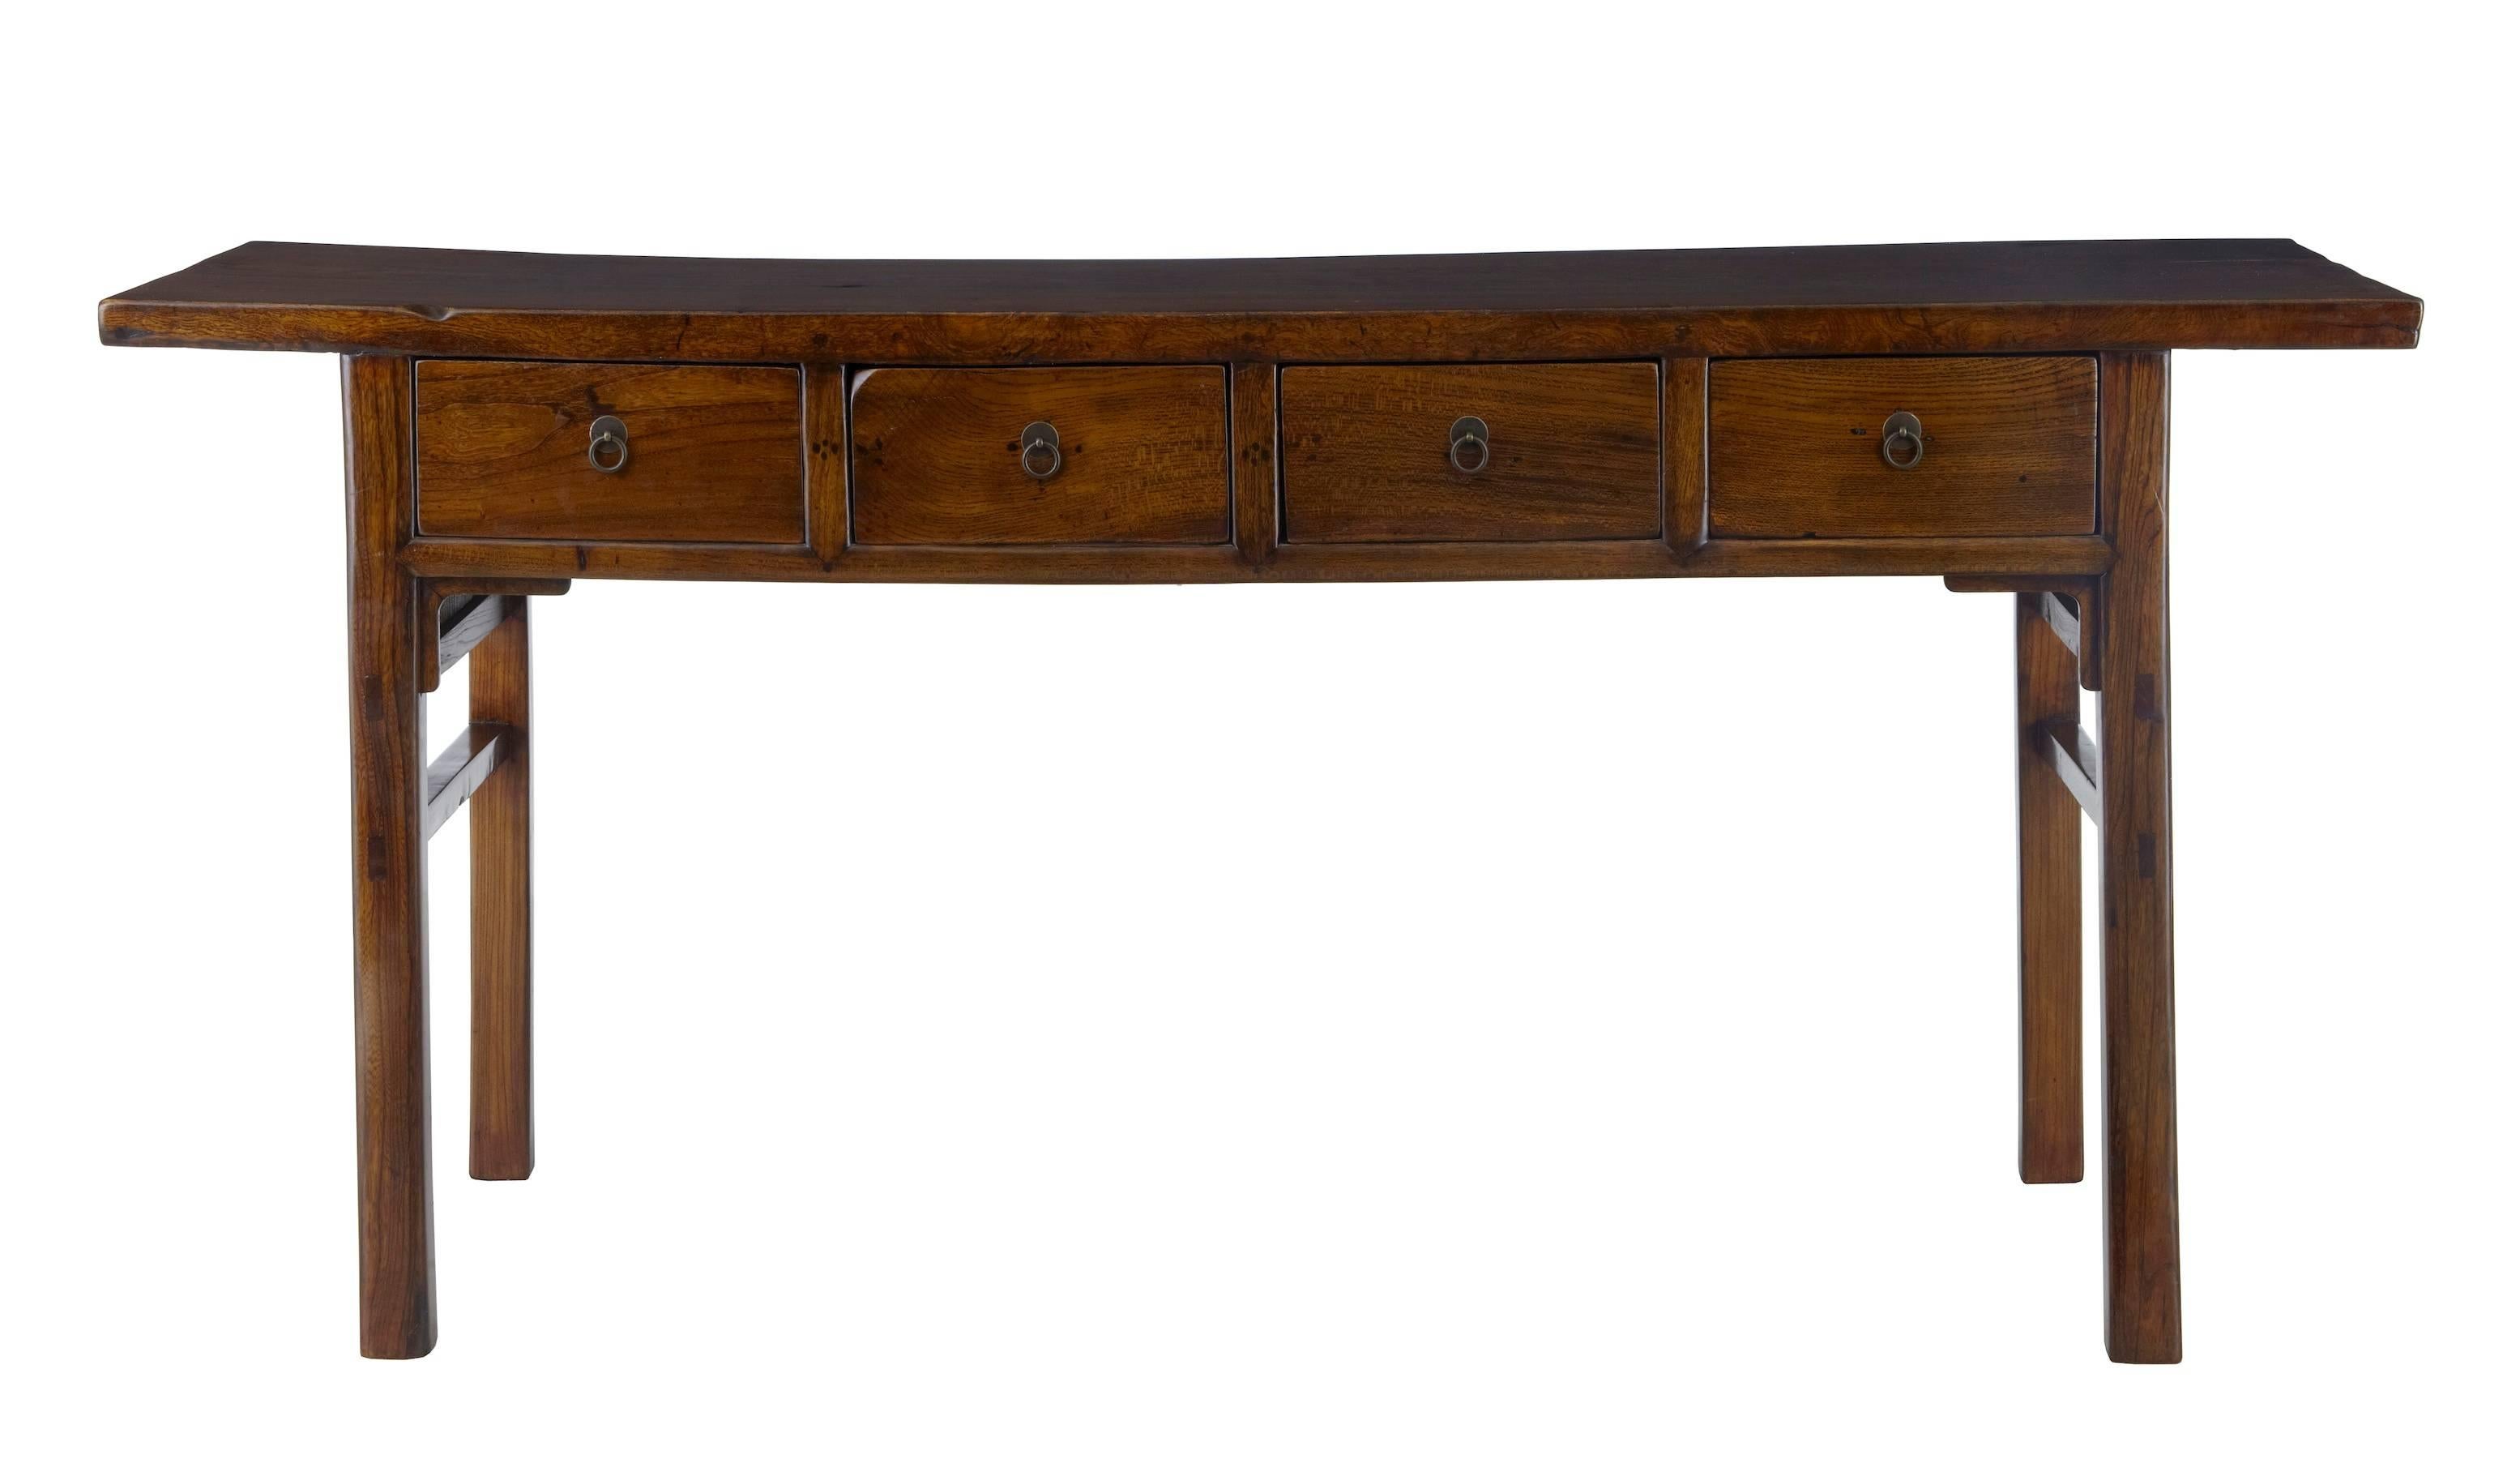 Excellent quality dresser base, circa 1870.
Four-drawer dresser base.
Traditional shape and design Chinese sideboard.
Excellent color and patina.

Measures: Height: 33 1/2